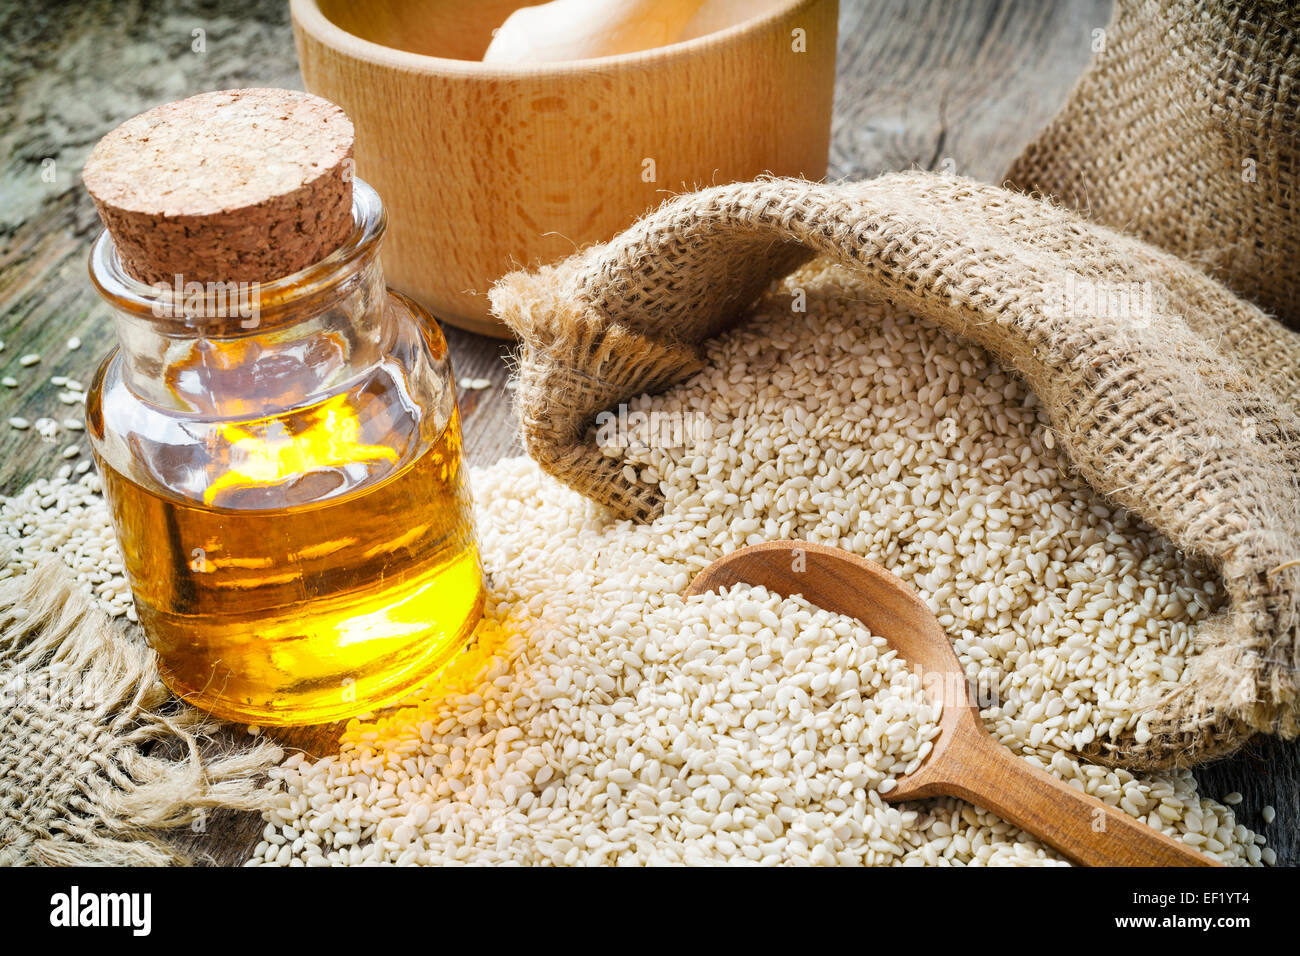 sesame seeds in sack and bottle of oil on wooden rustic table Stock Photo